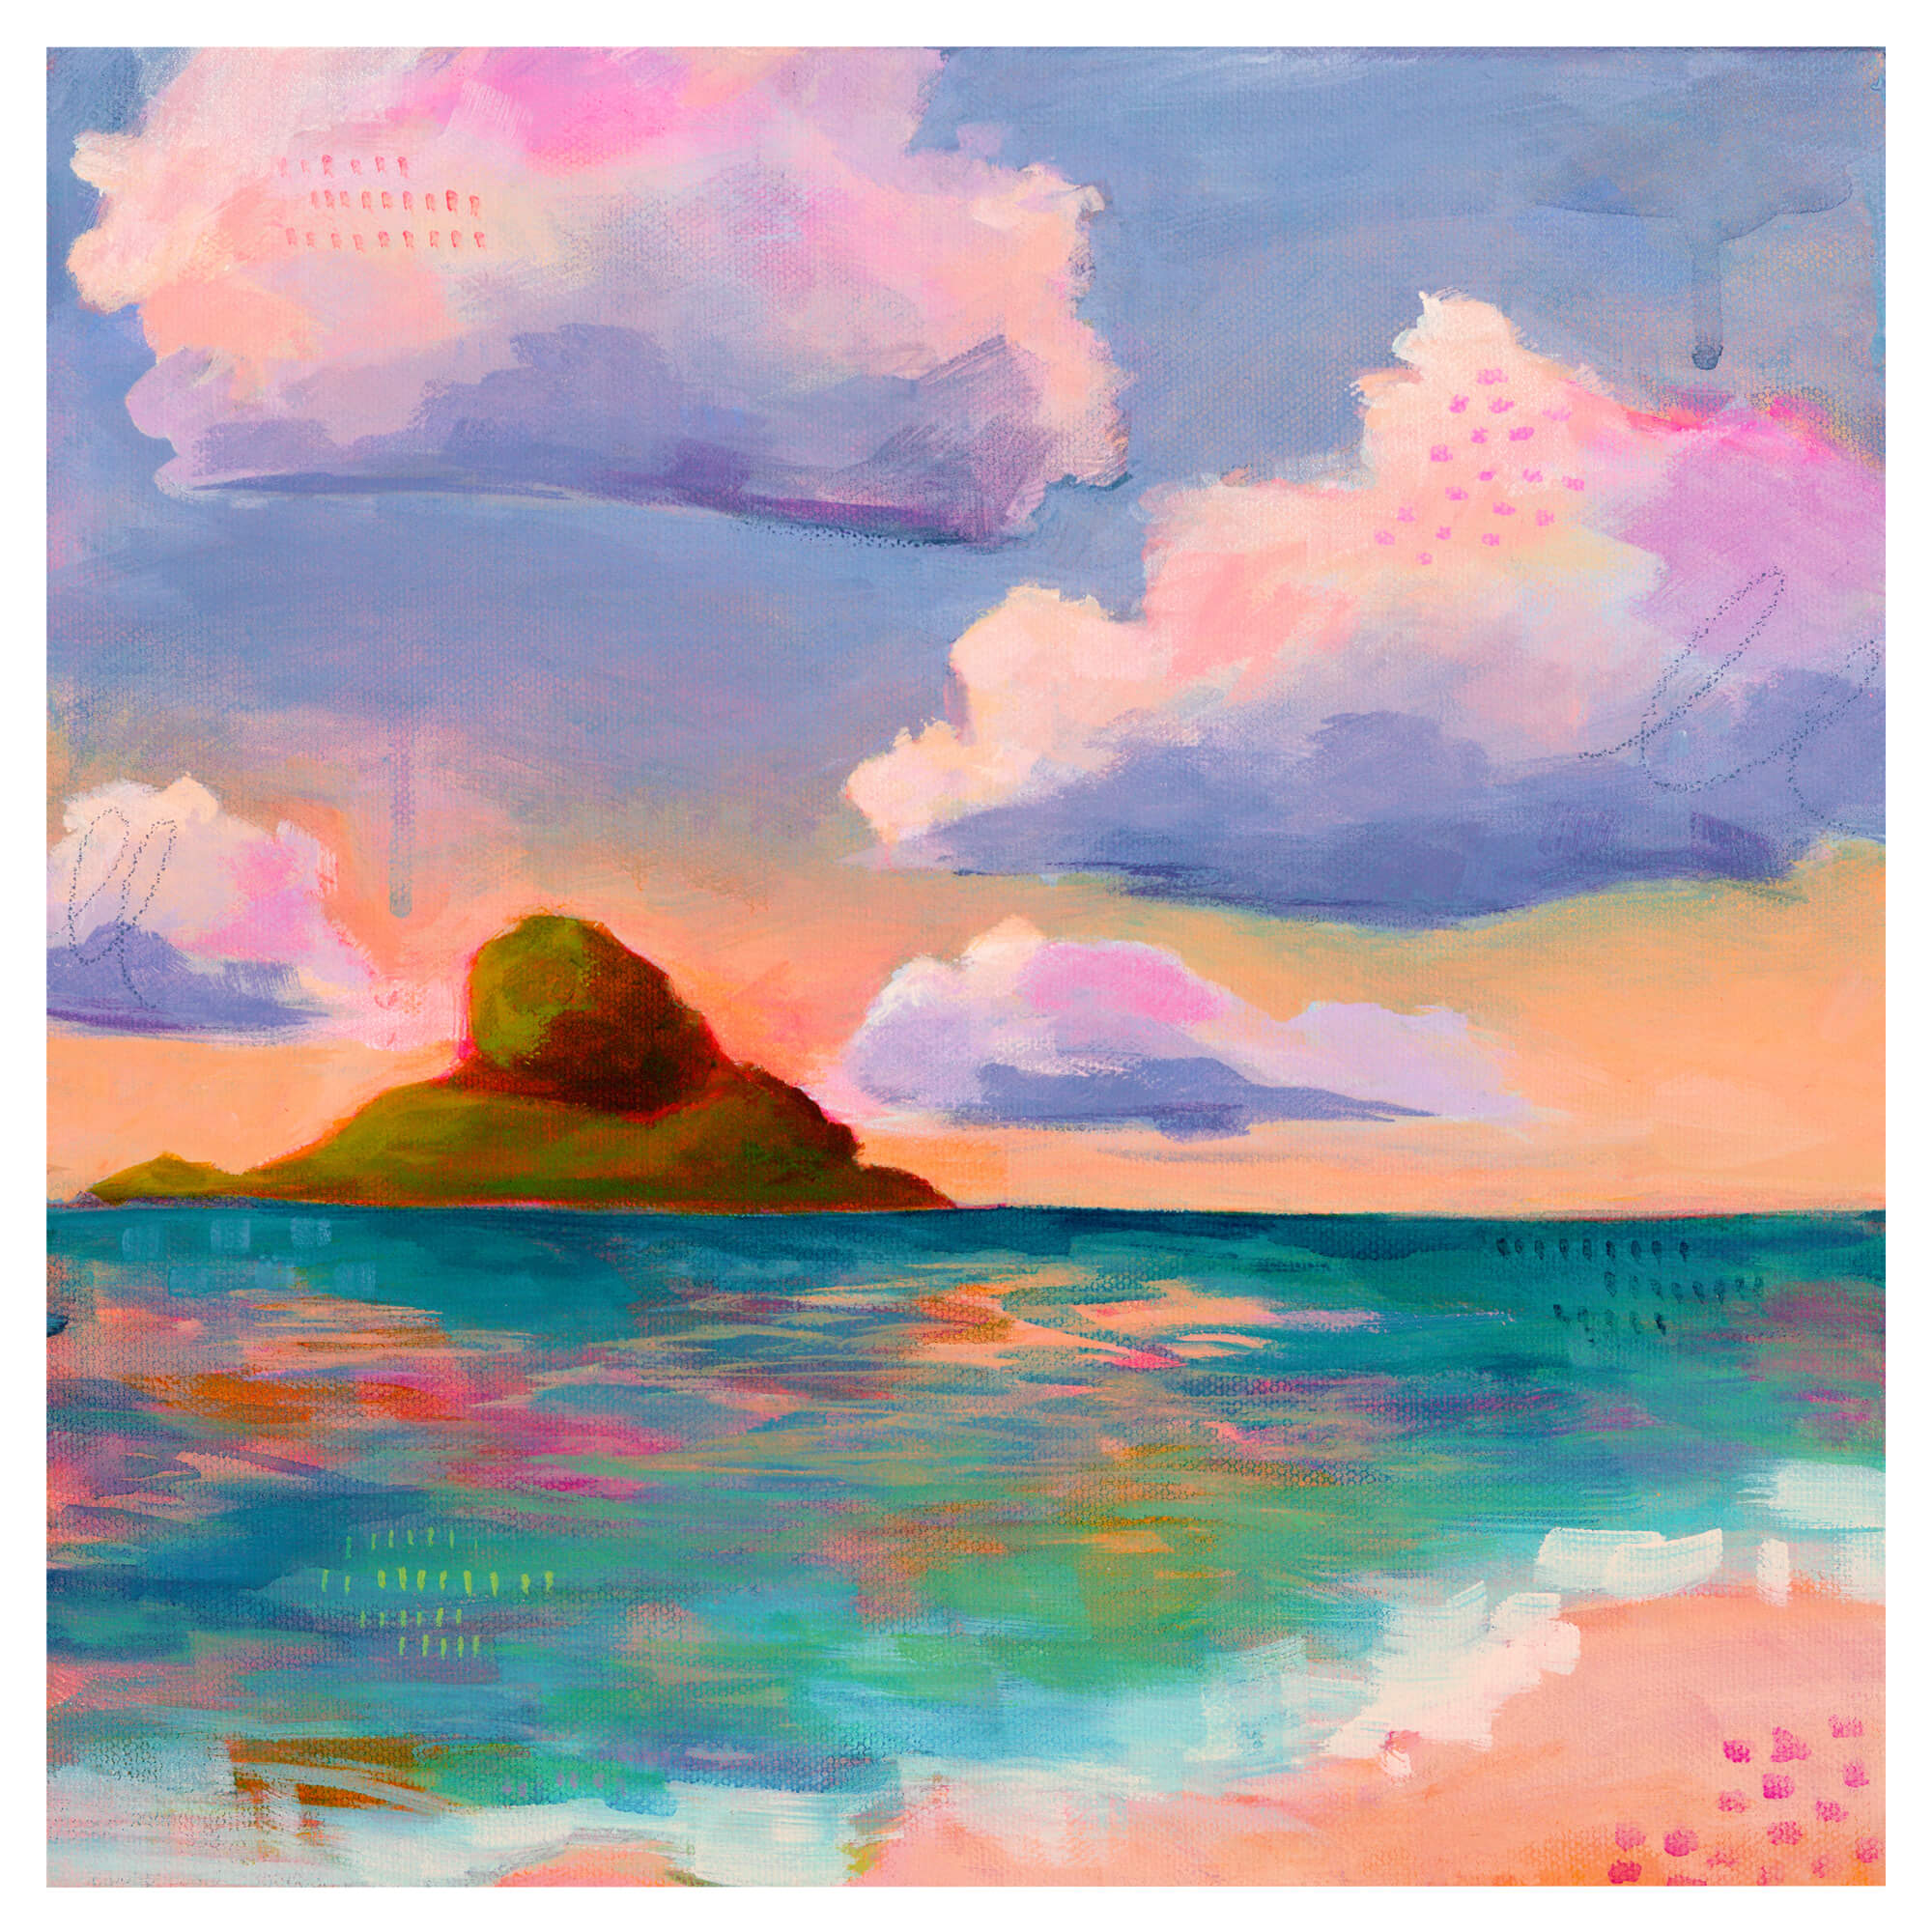 A vibrant multi-colored seascape by Hawaii artist Lindsay Wilkins